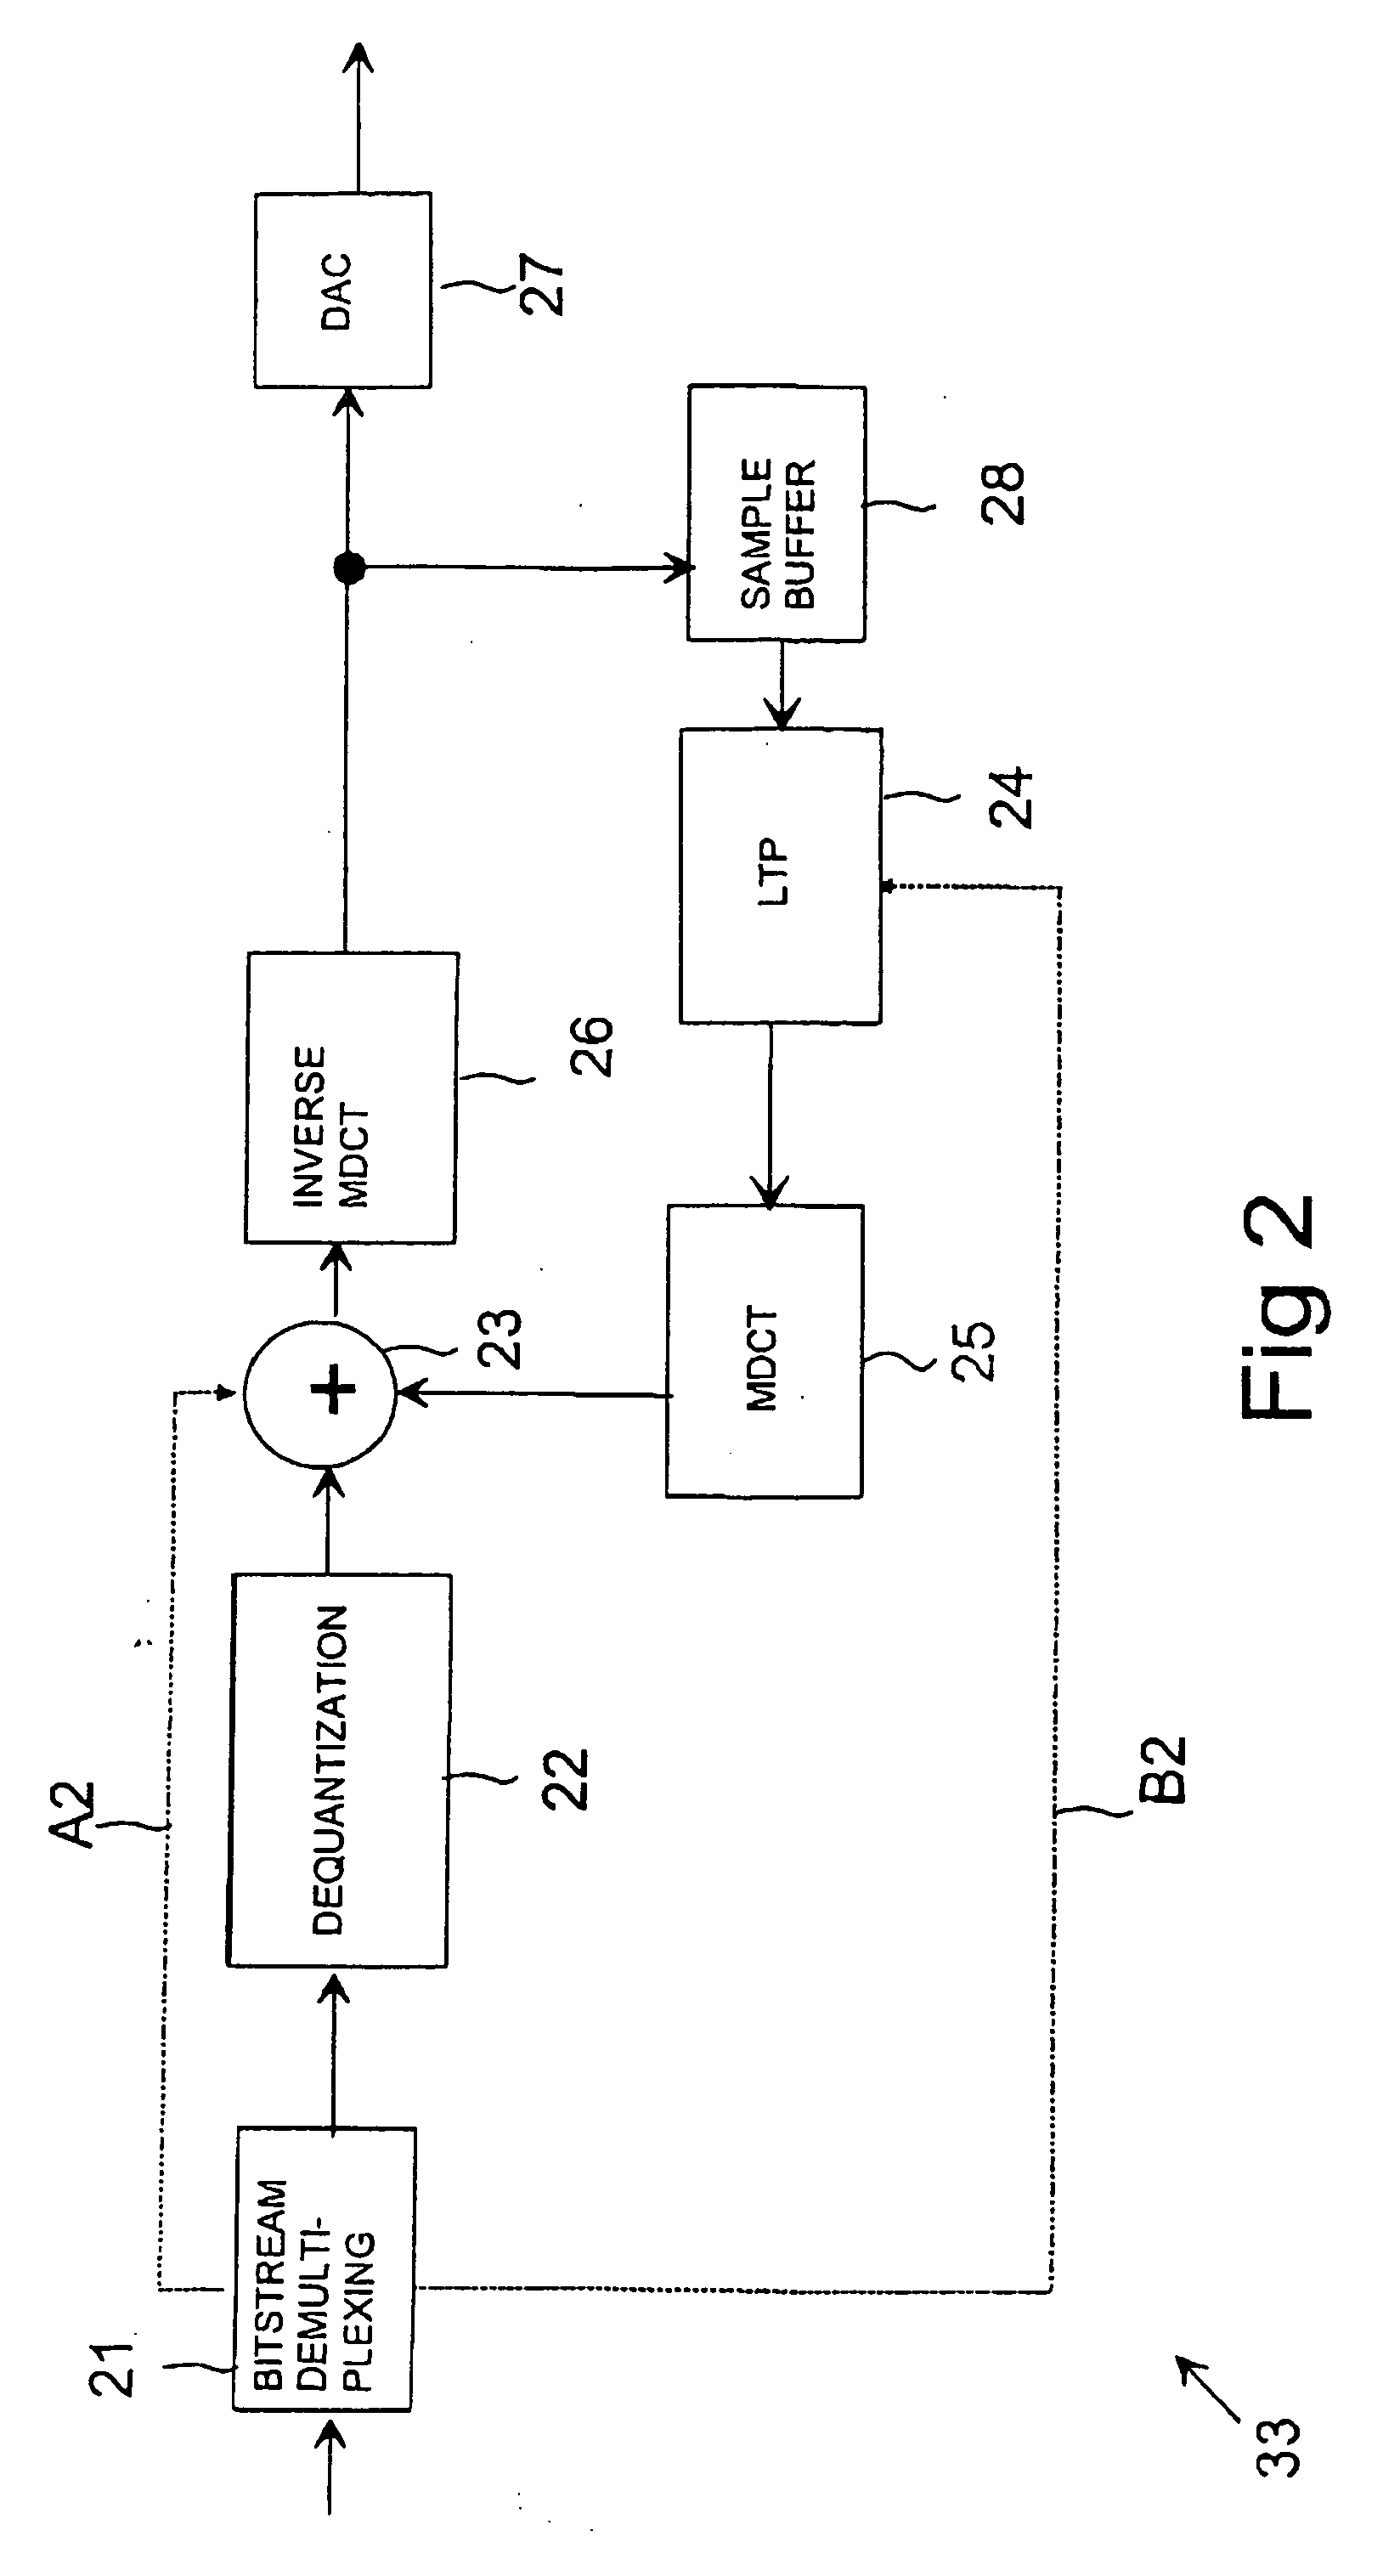 Method for improving the coding efficiency of an audio signal